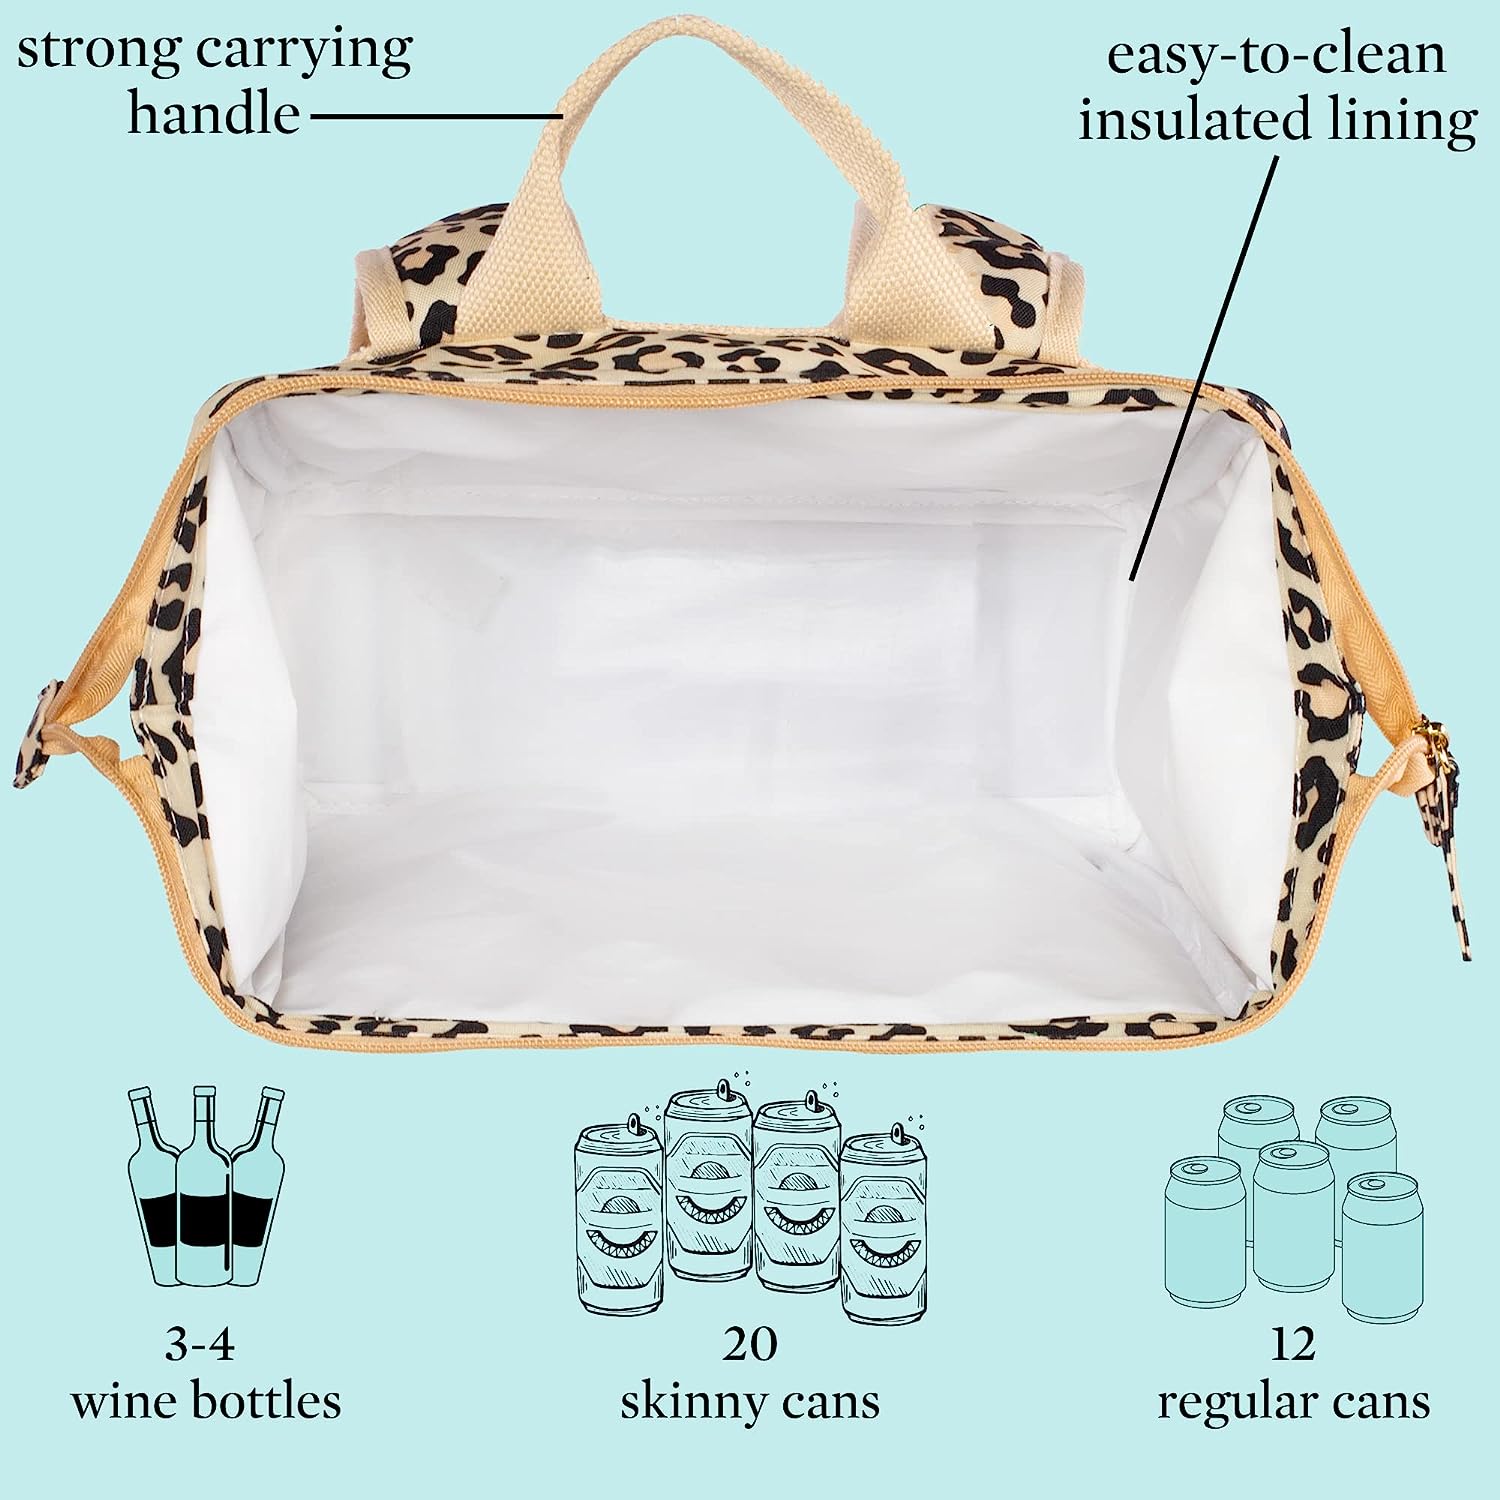 leopard print backpack cooler with insulated interior lining for picnics, hiking, and beach days